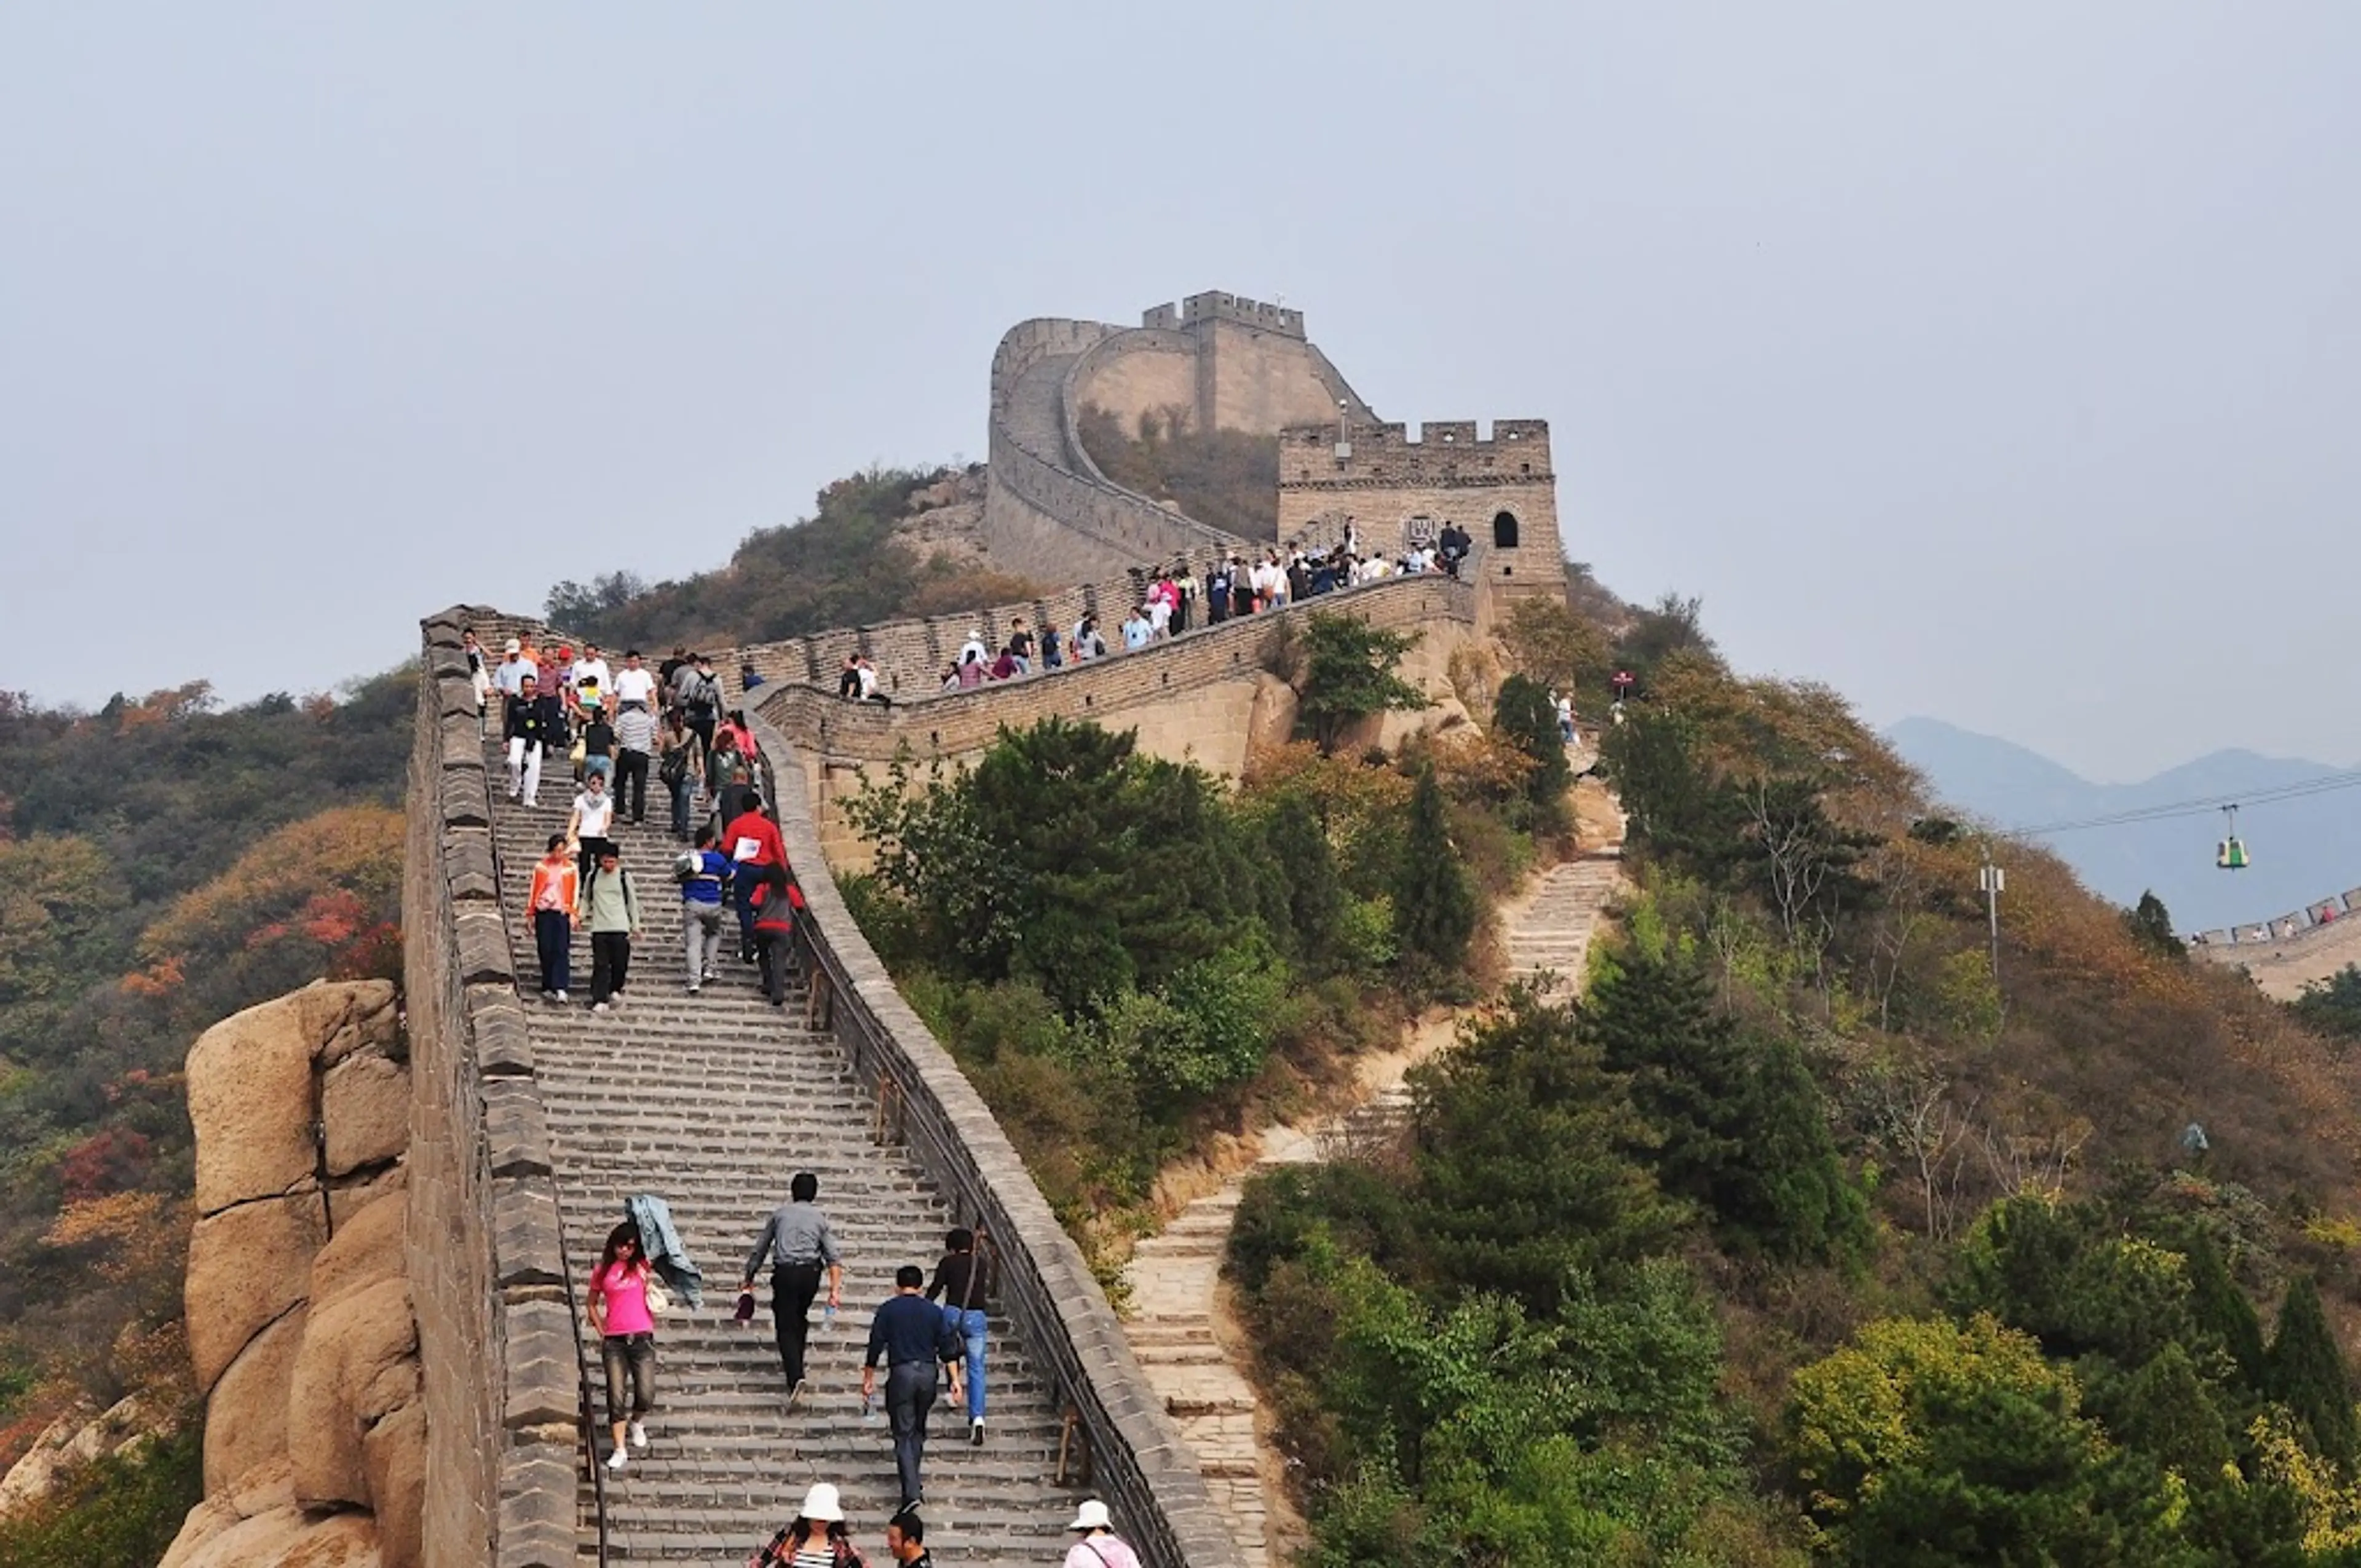 Badaling section of the Great Wall